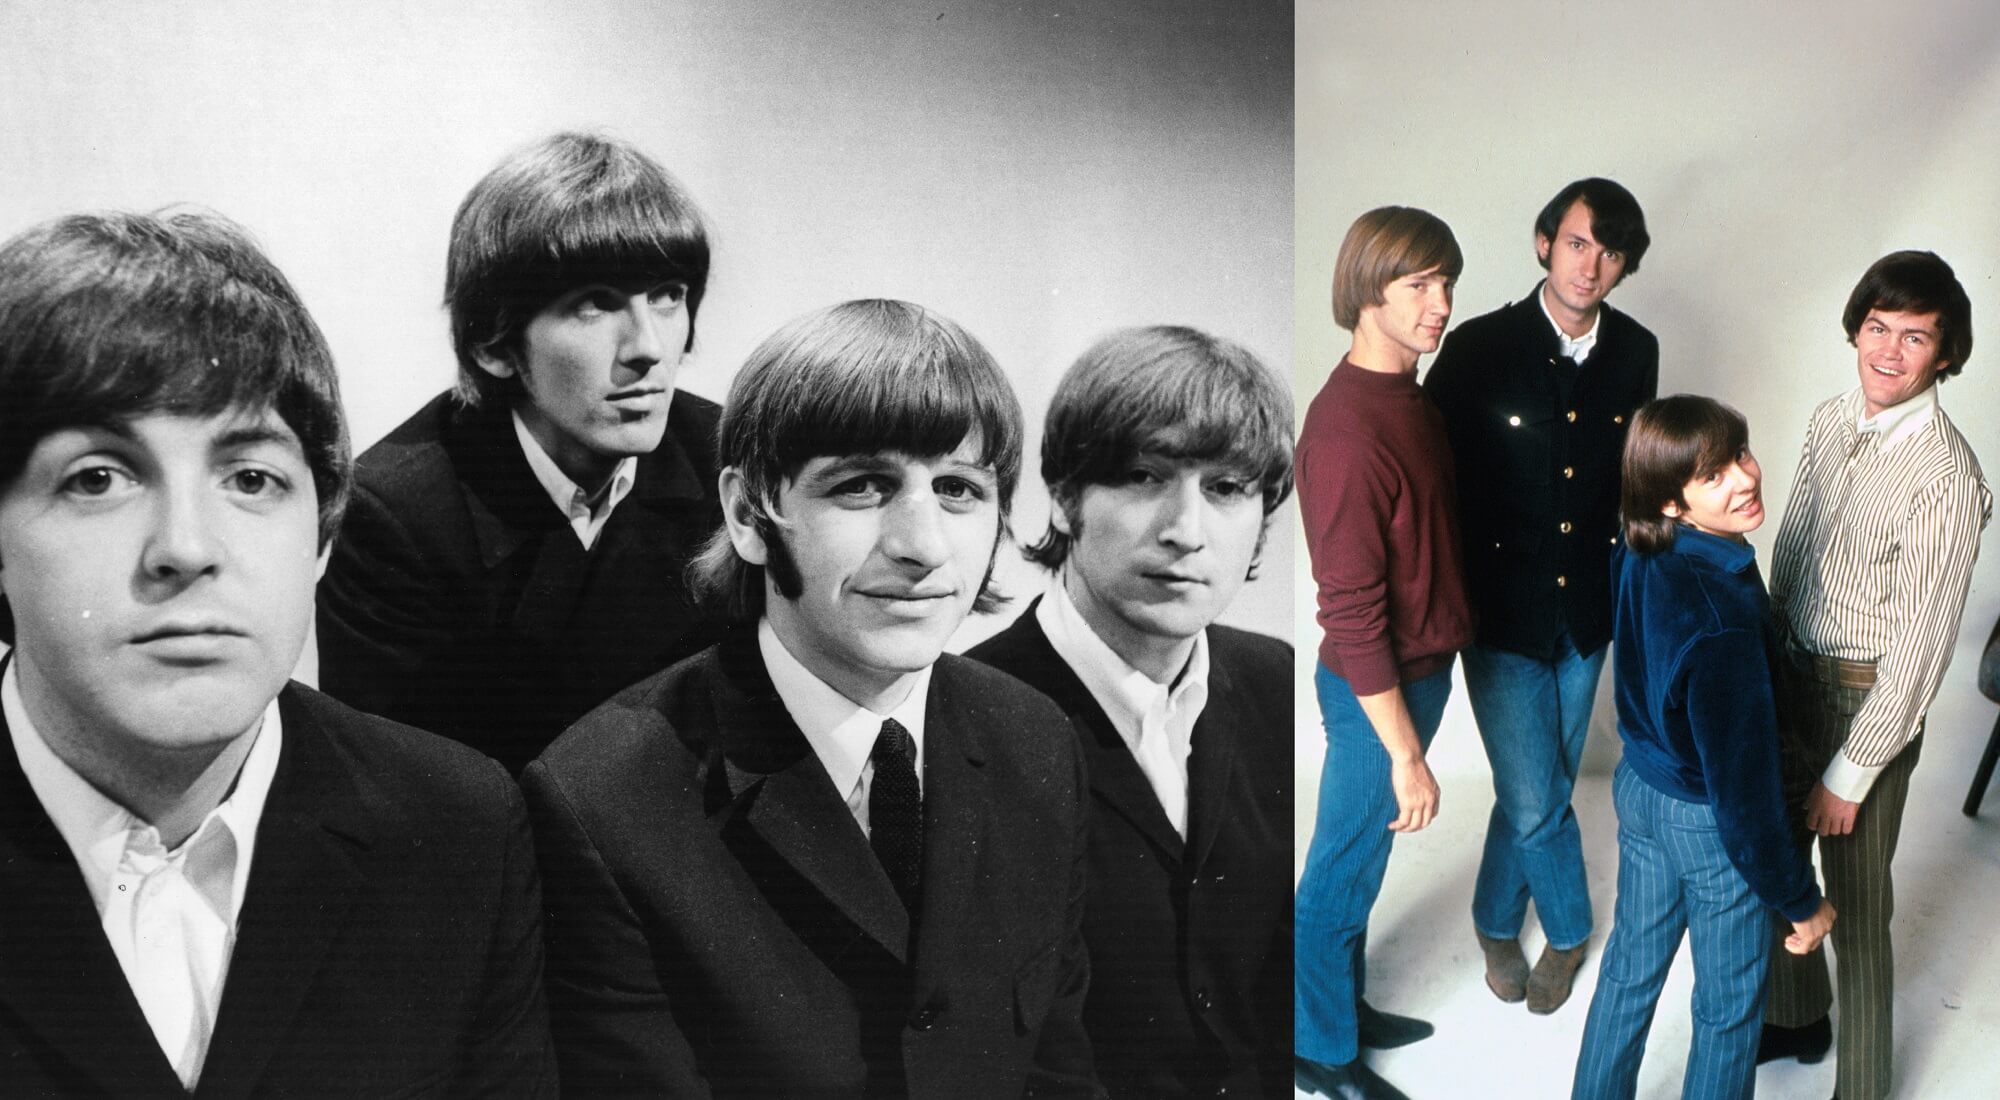 A joined photo of The Beatles and The Monkees